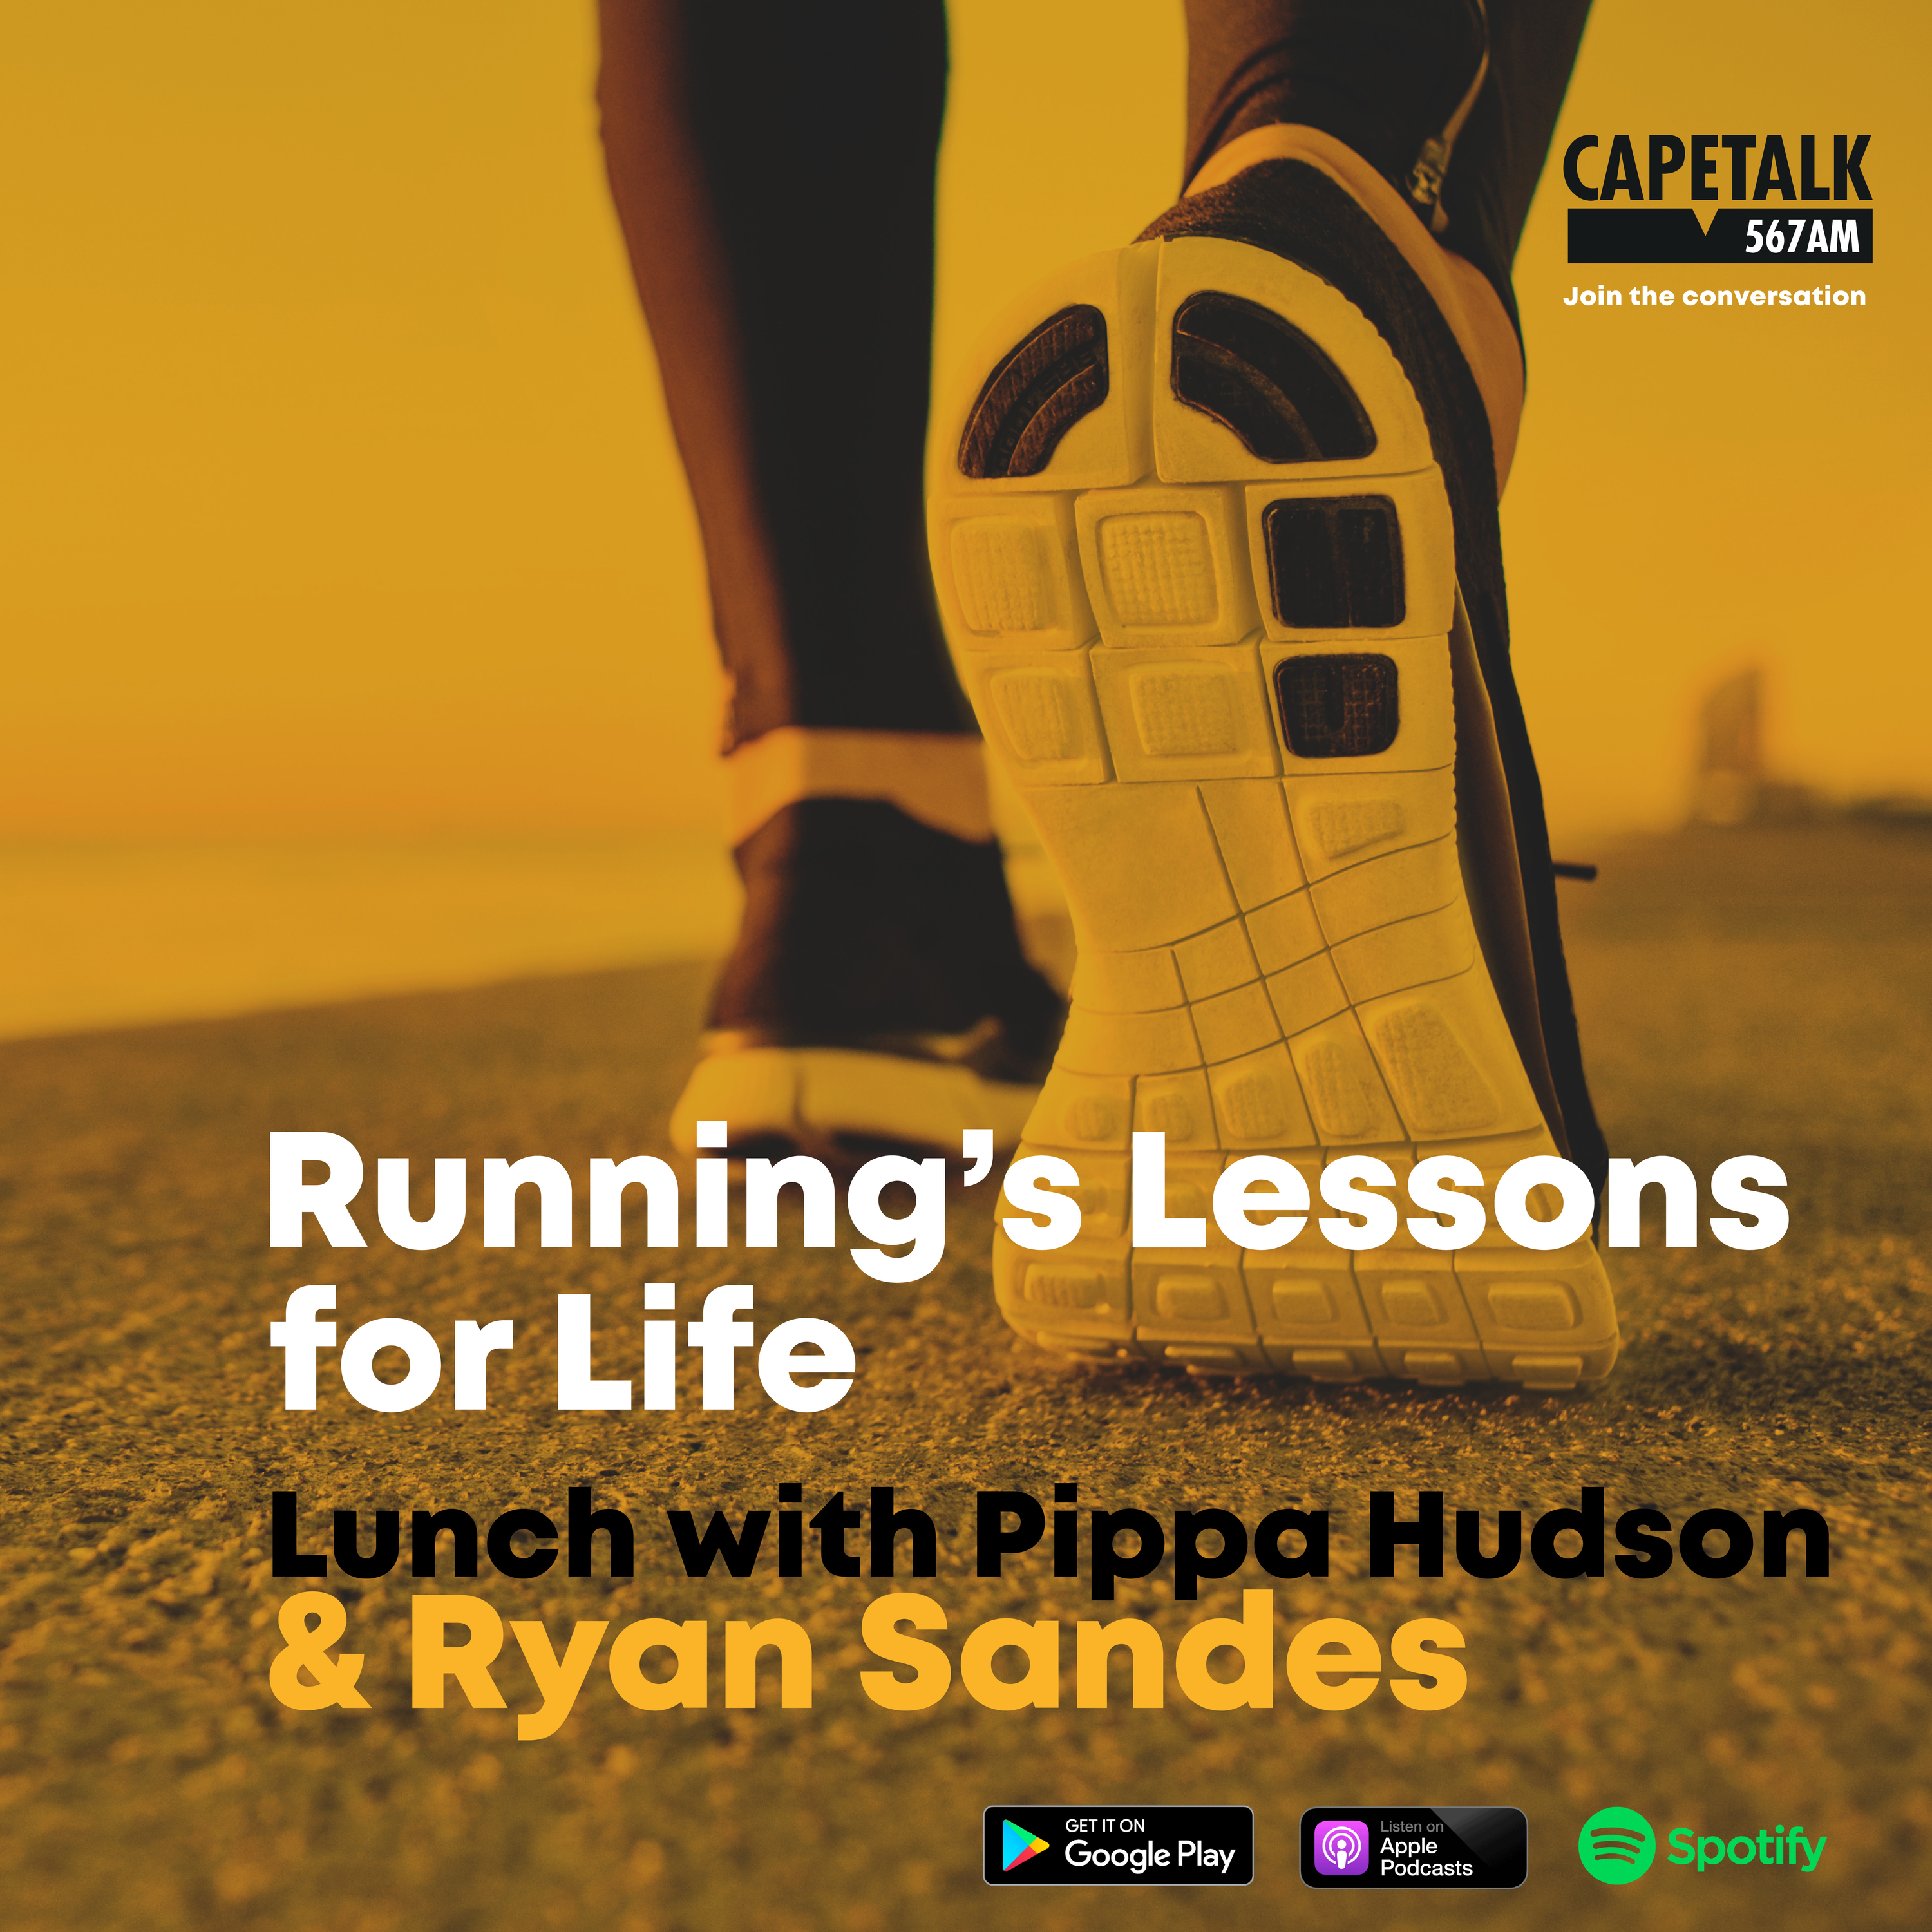 EPISODE 3: Running's Lessons for Life: Ryan Sandes